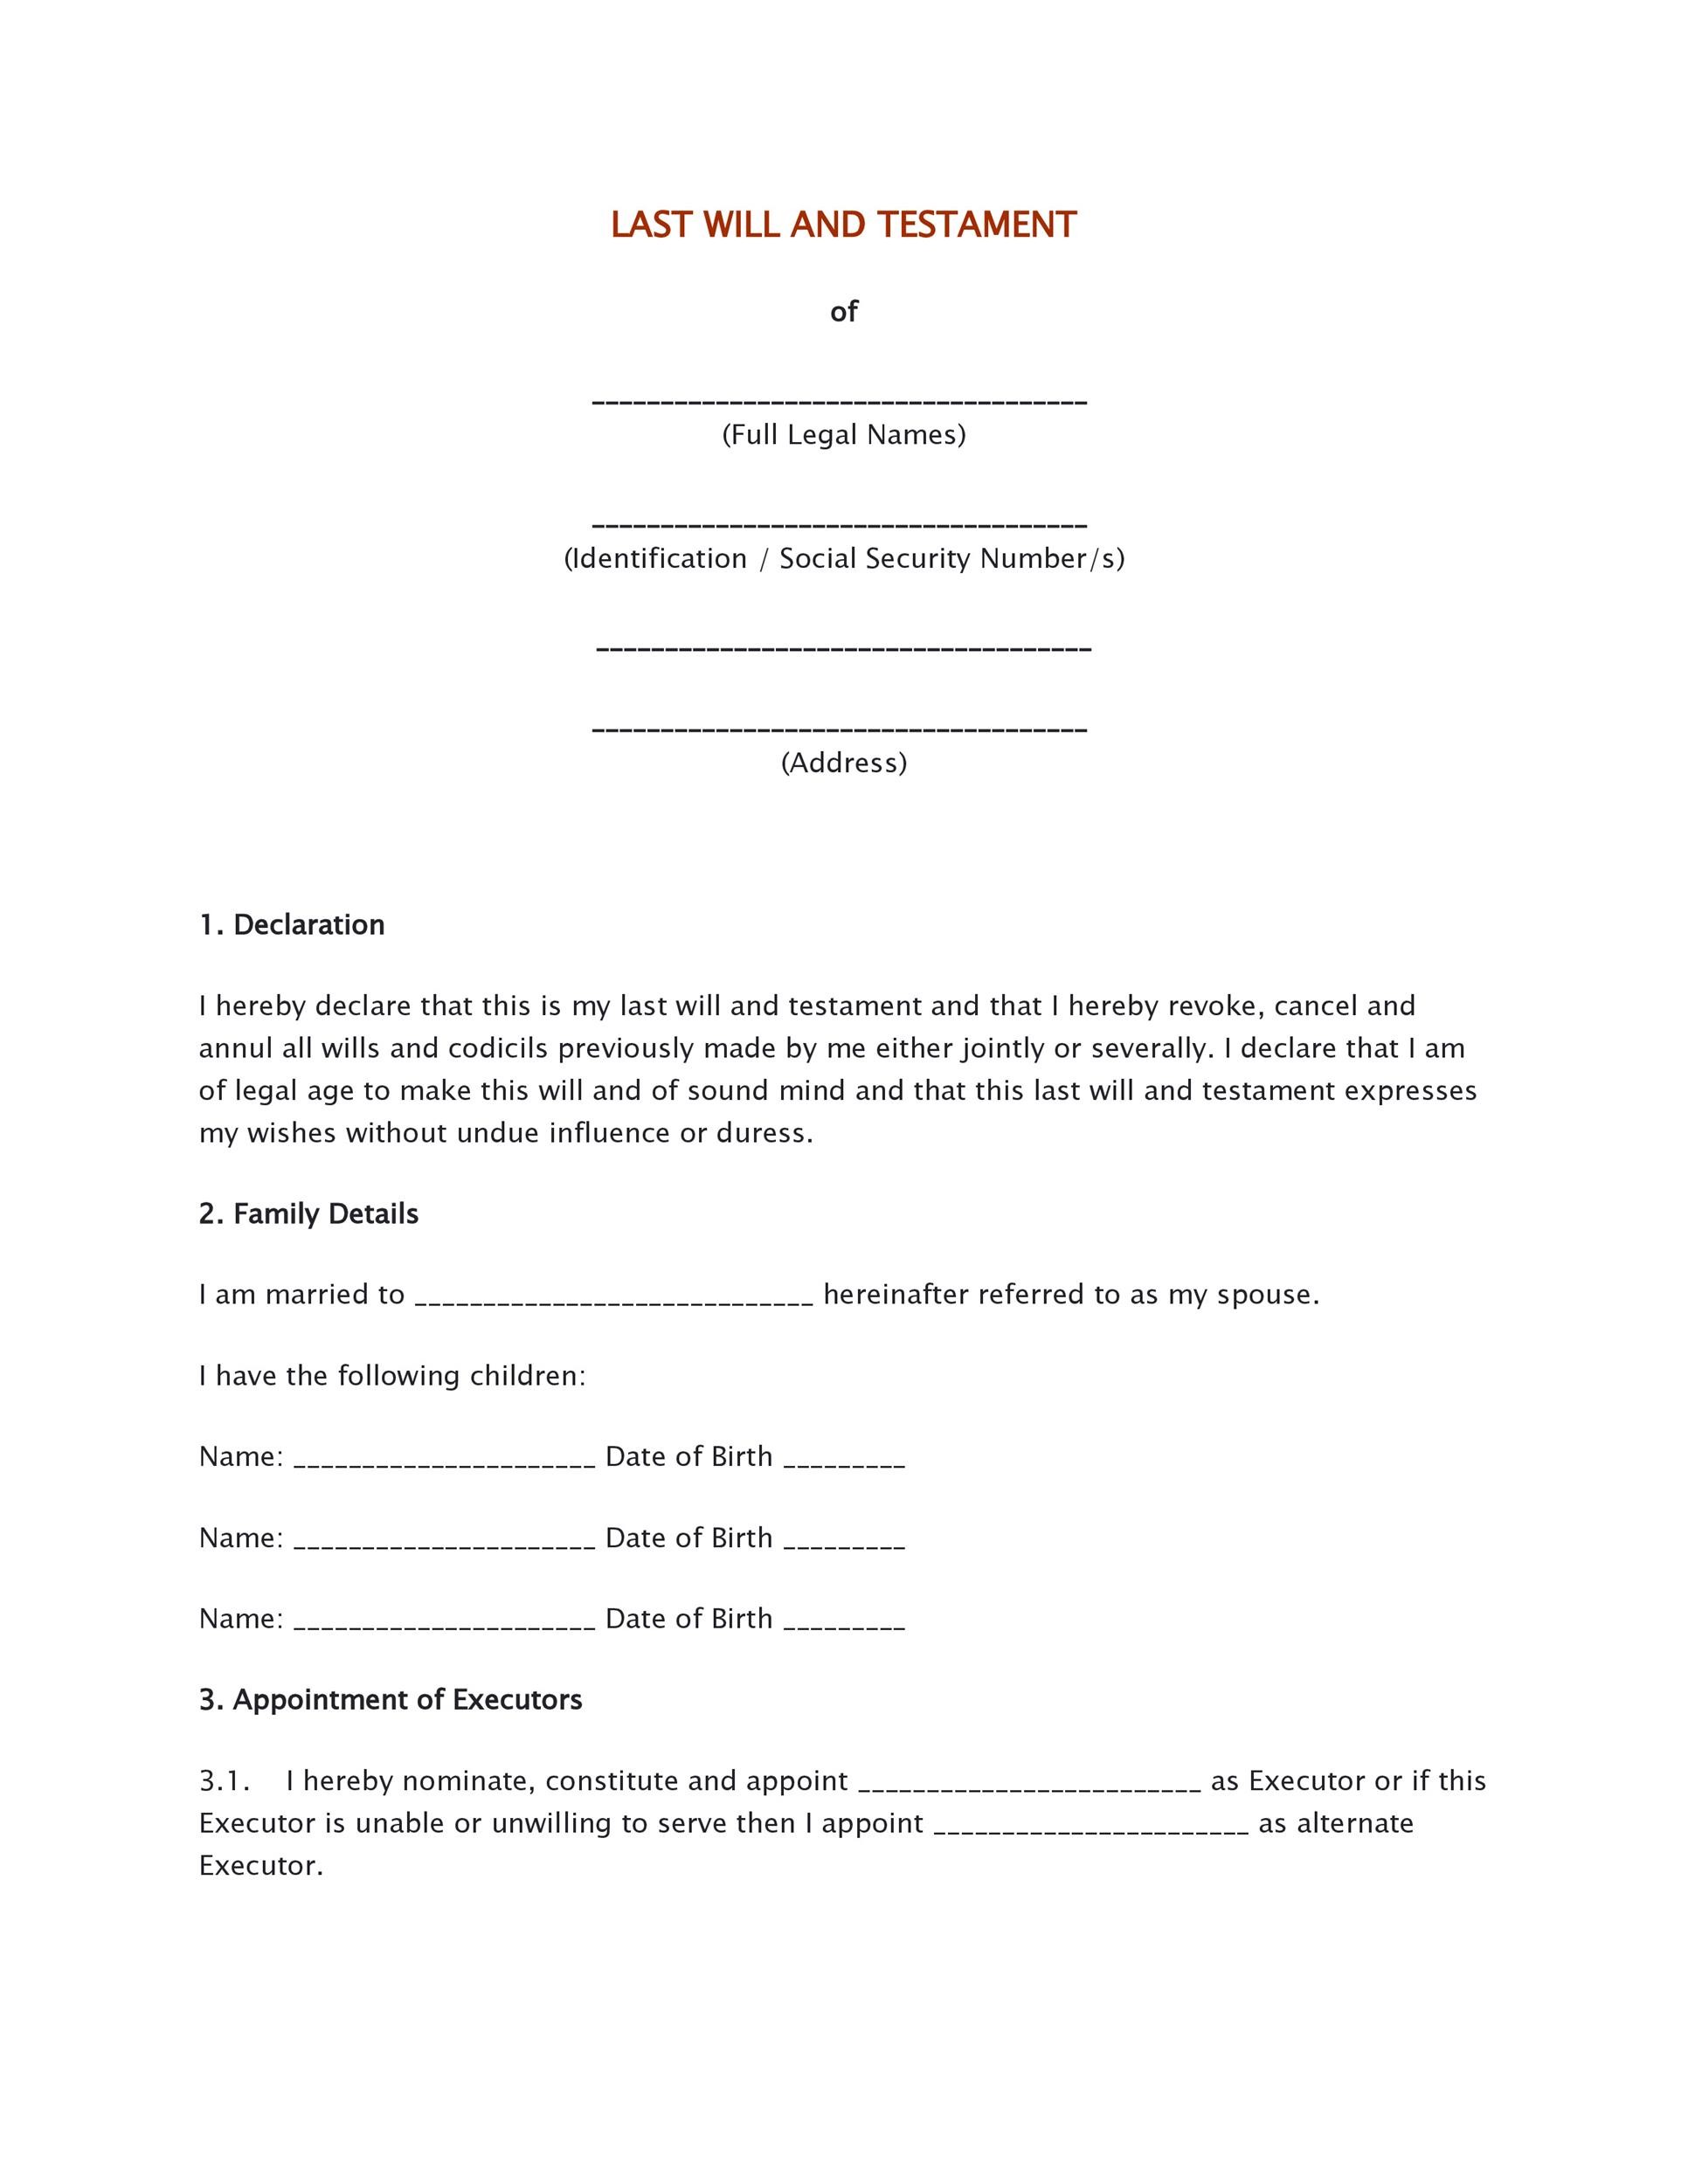 free-will-testament-forms-printable